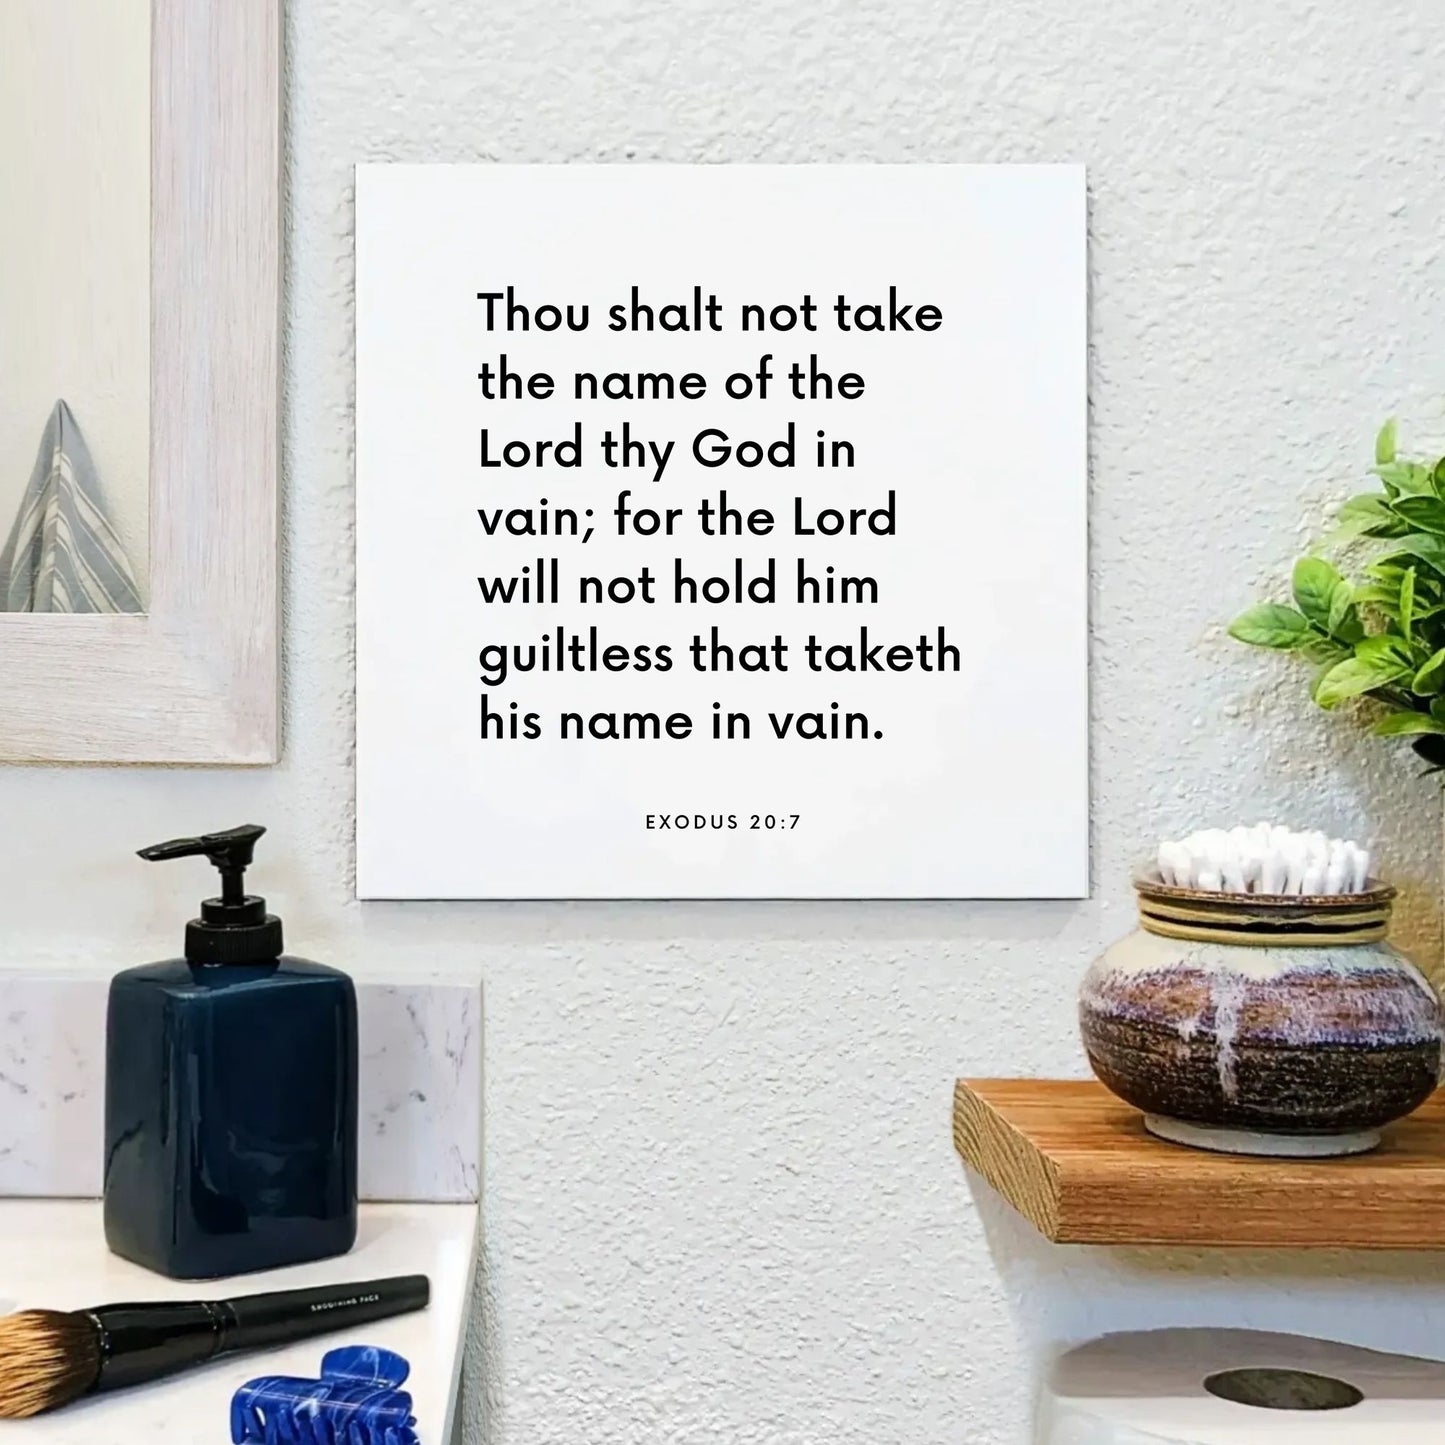 Bathroom mouting of the scripture tile for Exodus 20:7 - "Thou shalt not take the name of the Lord thy God in vain"